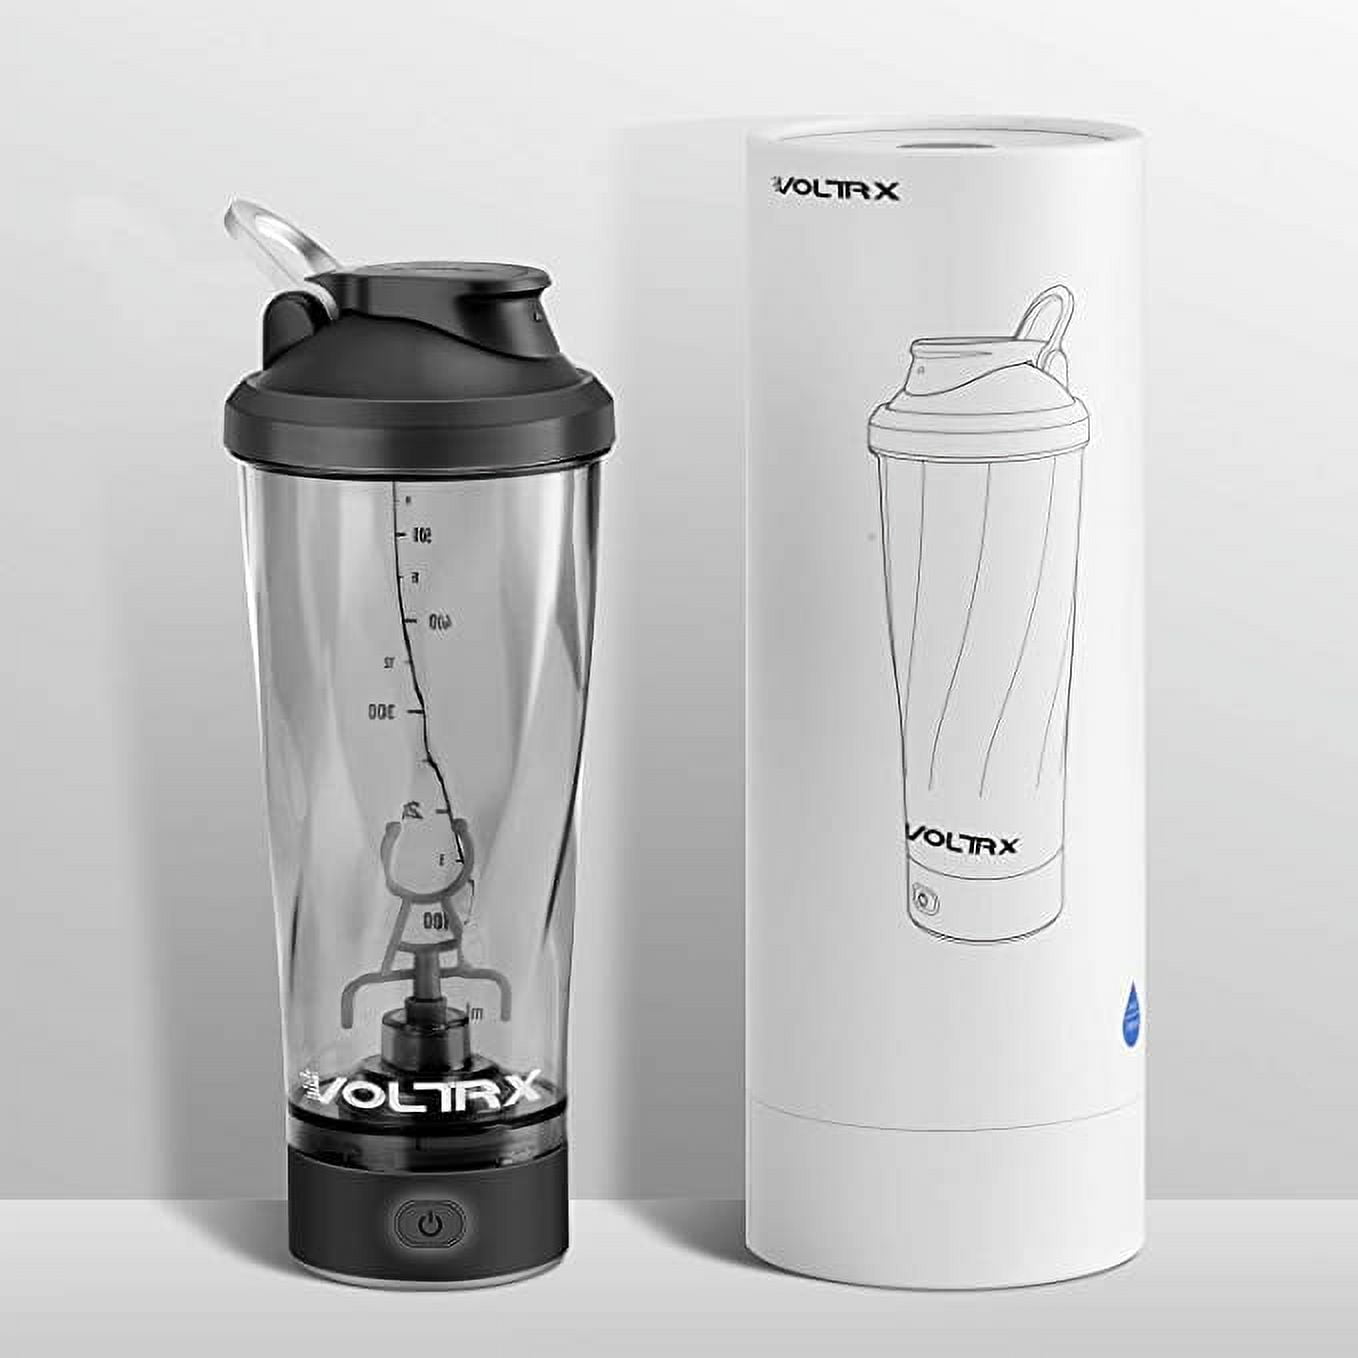 VOLTRX Protein Shaker Bottle, Merger USB C Rechargeable Electric Protein Shake Mixer, Shaker Cups for Protein Shakes and Meal Replacement Shakes